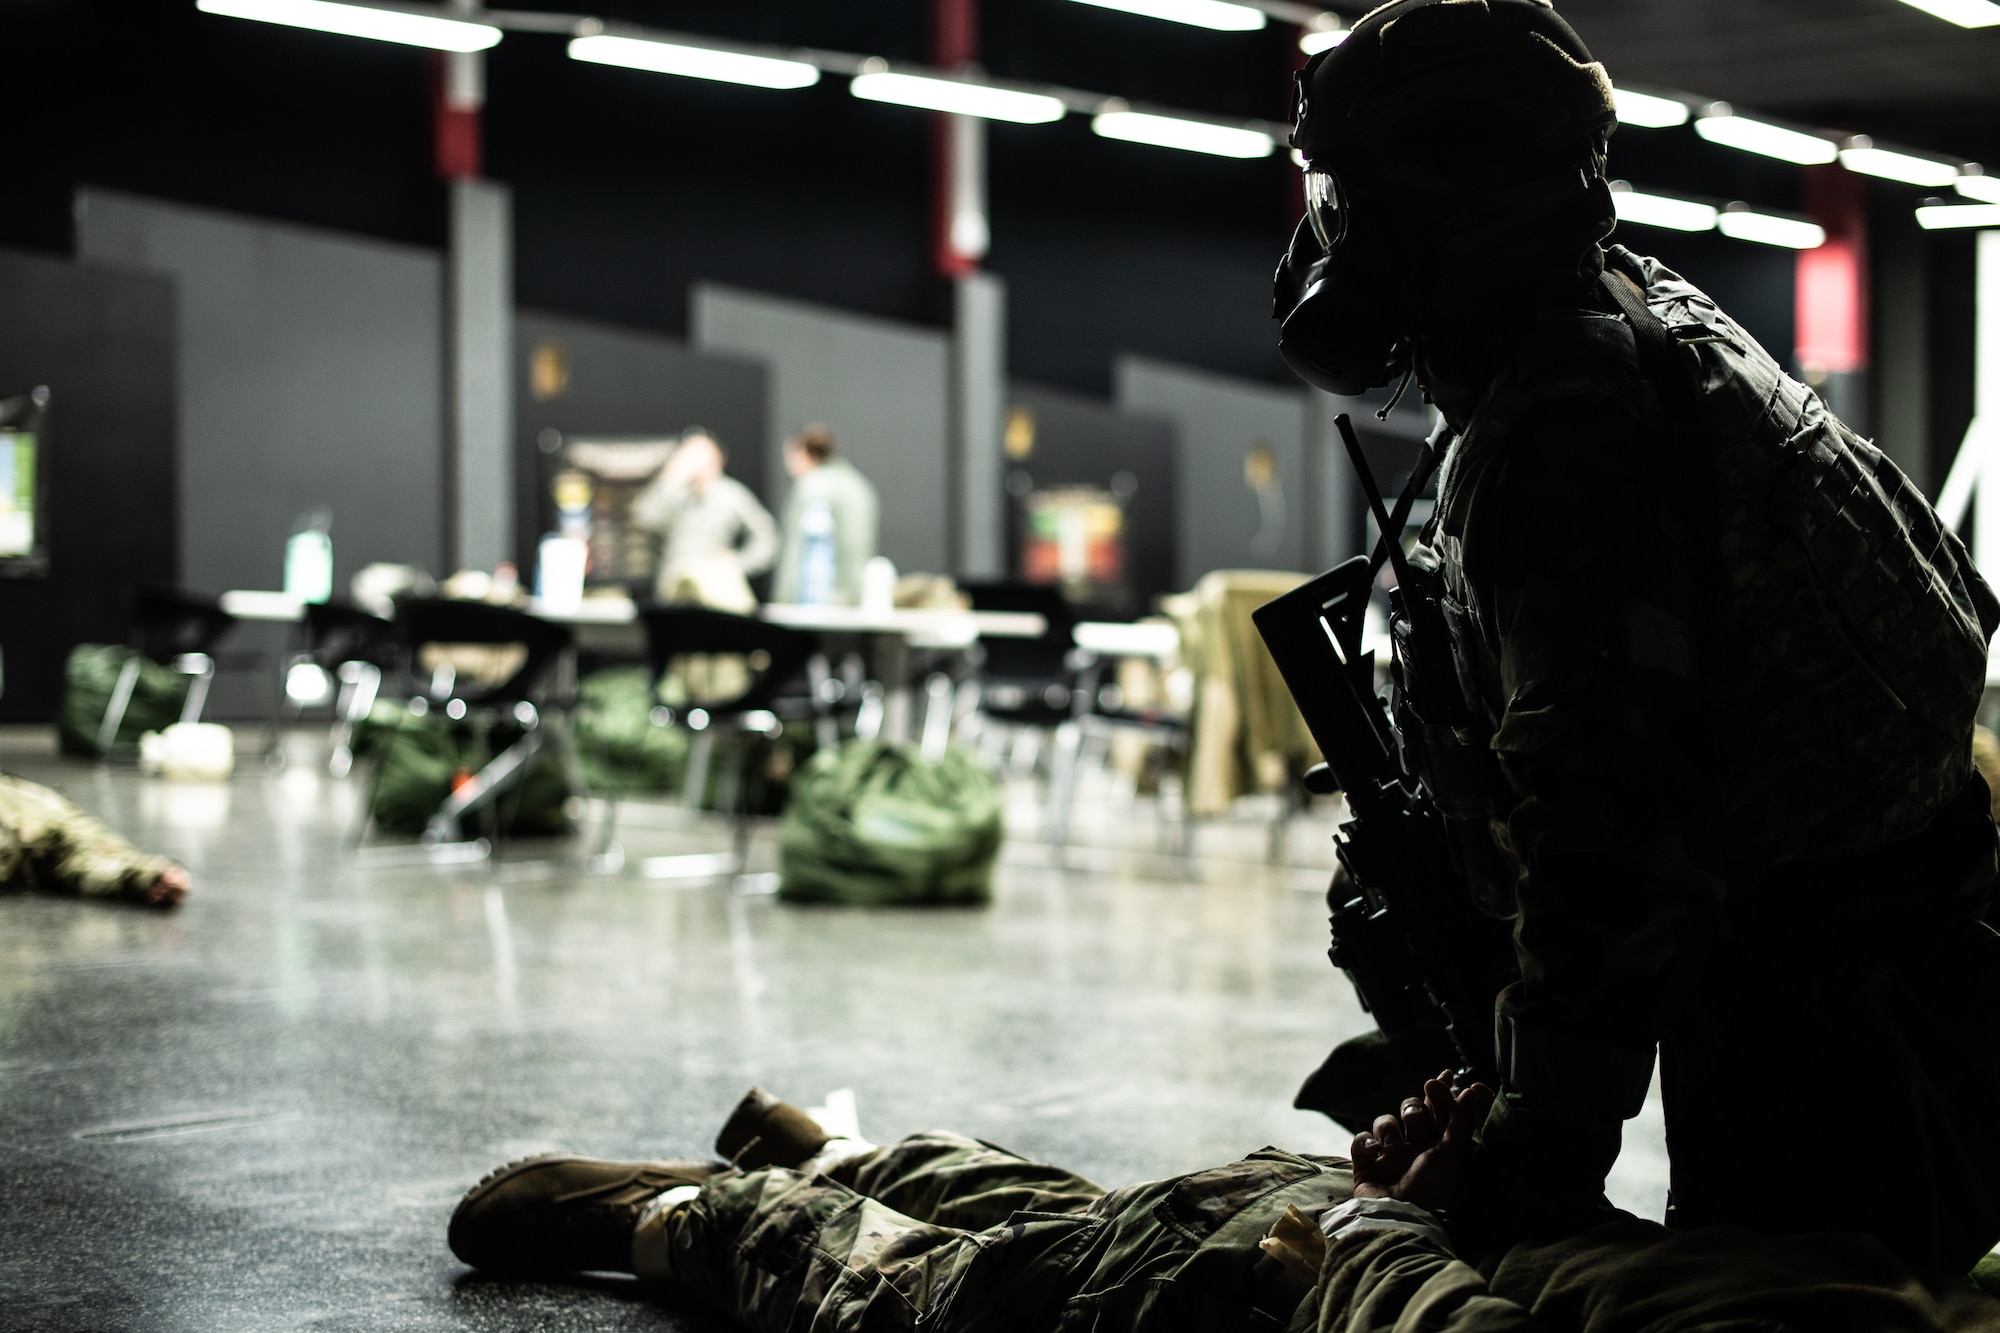 A U.S. Air Force Airman assigned to the 86th Security Forces Squadron detains an acting adversary during exercise Operation Varsity 19-04 at Ramstein Air Base, Germany, Dec. 12, 2019. The scenario simulated a chemical attack which affected multiple individuals who were then decontaminated by hazardous materials personnel. (U.S. Air Force photo by Staff Sgt. Devin Boyer)